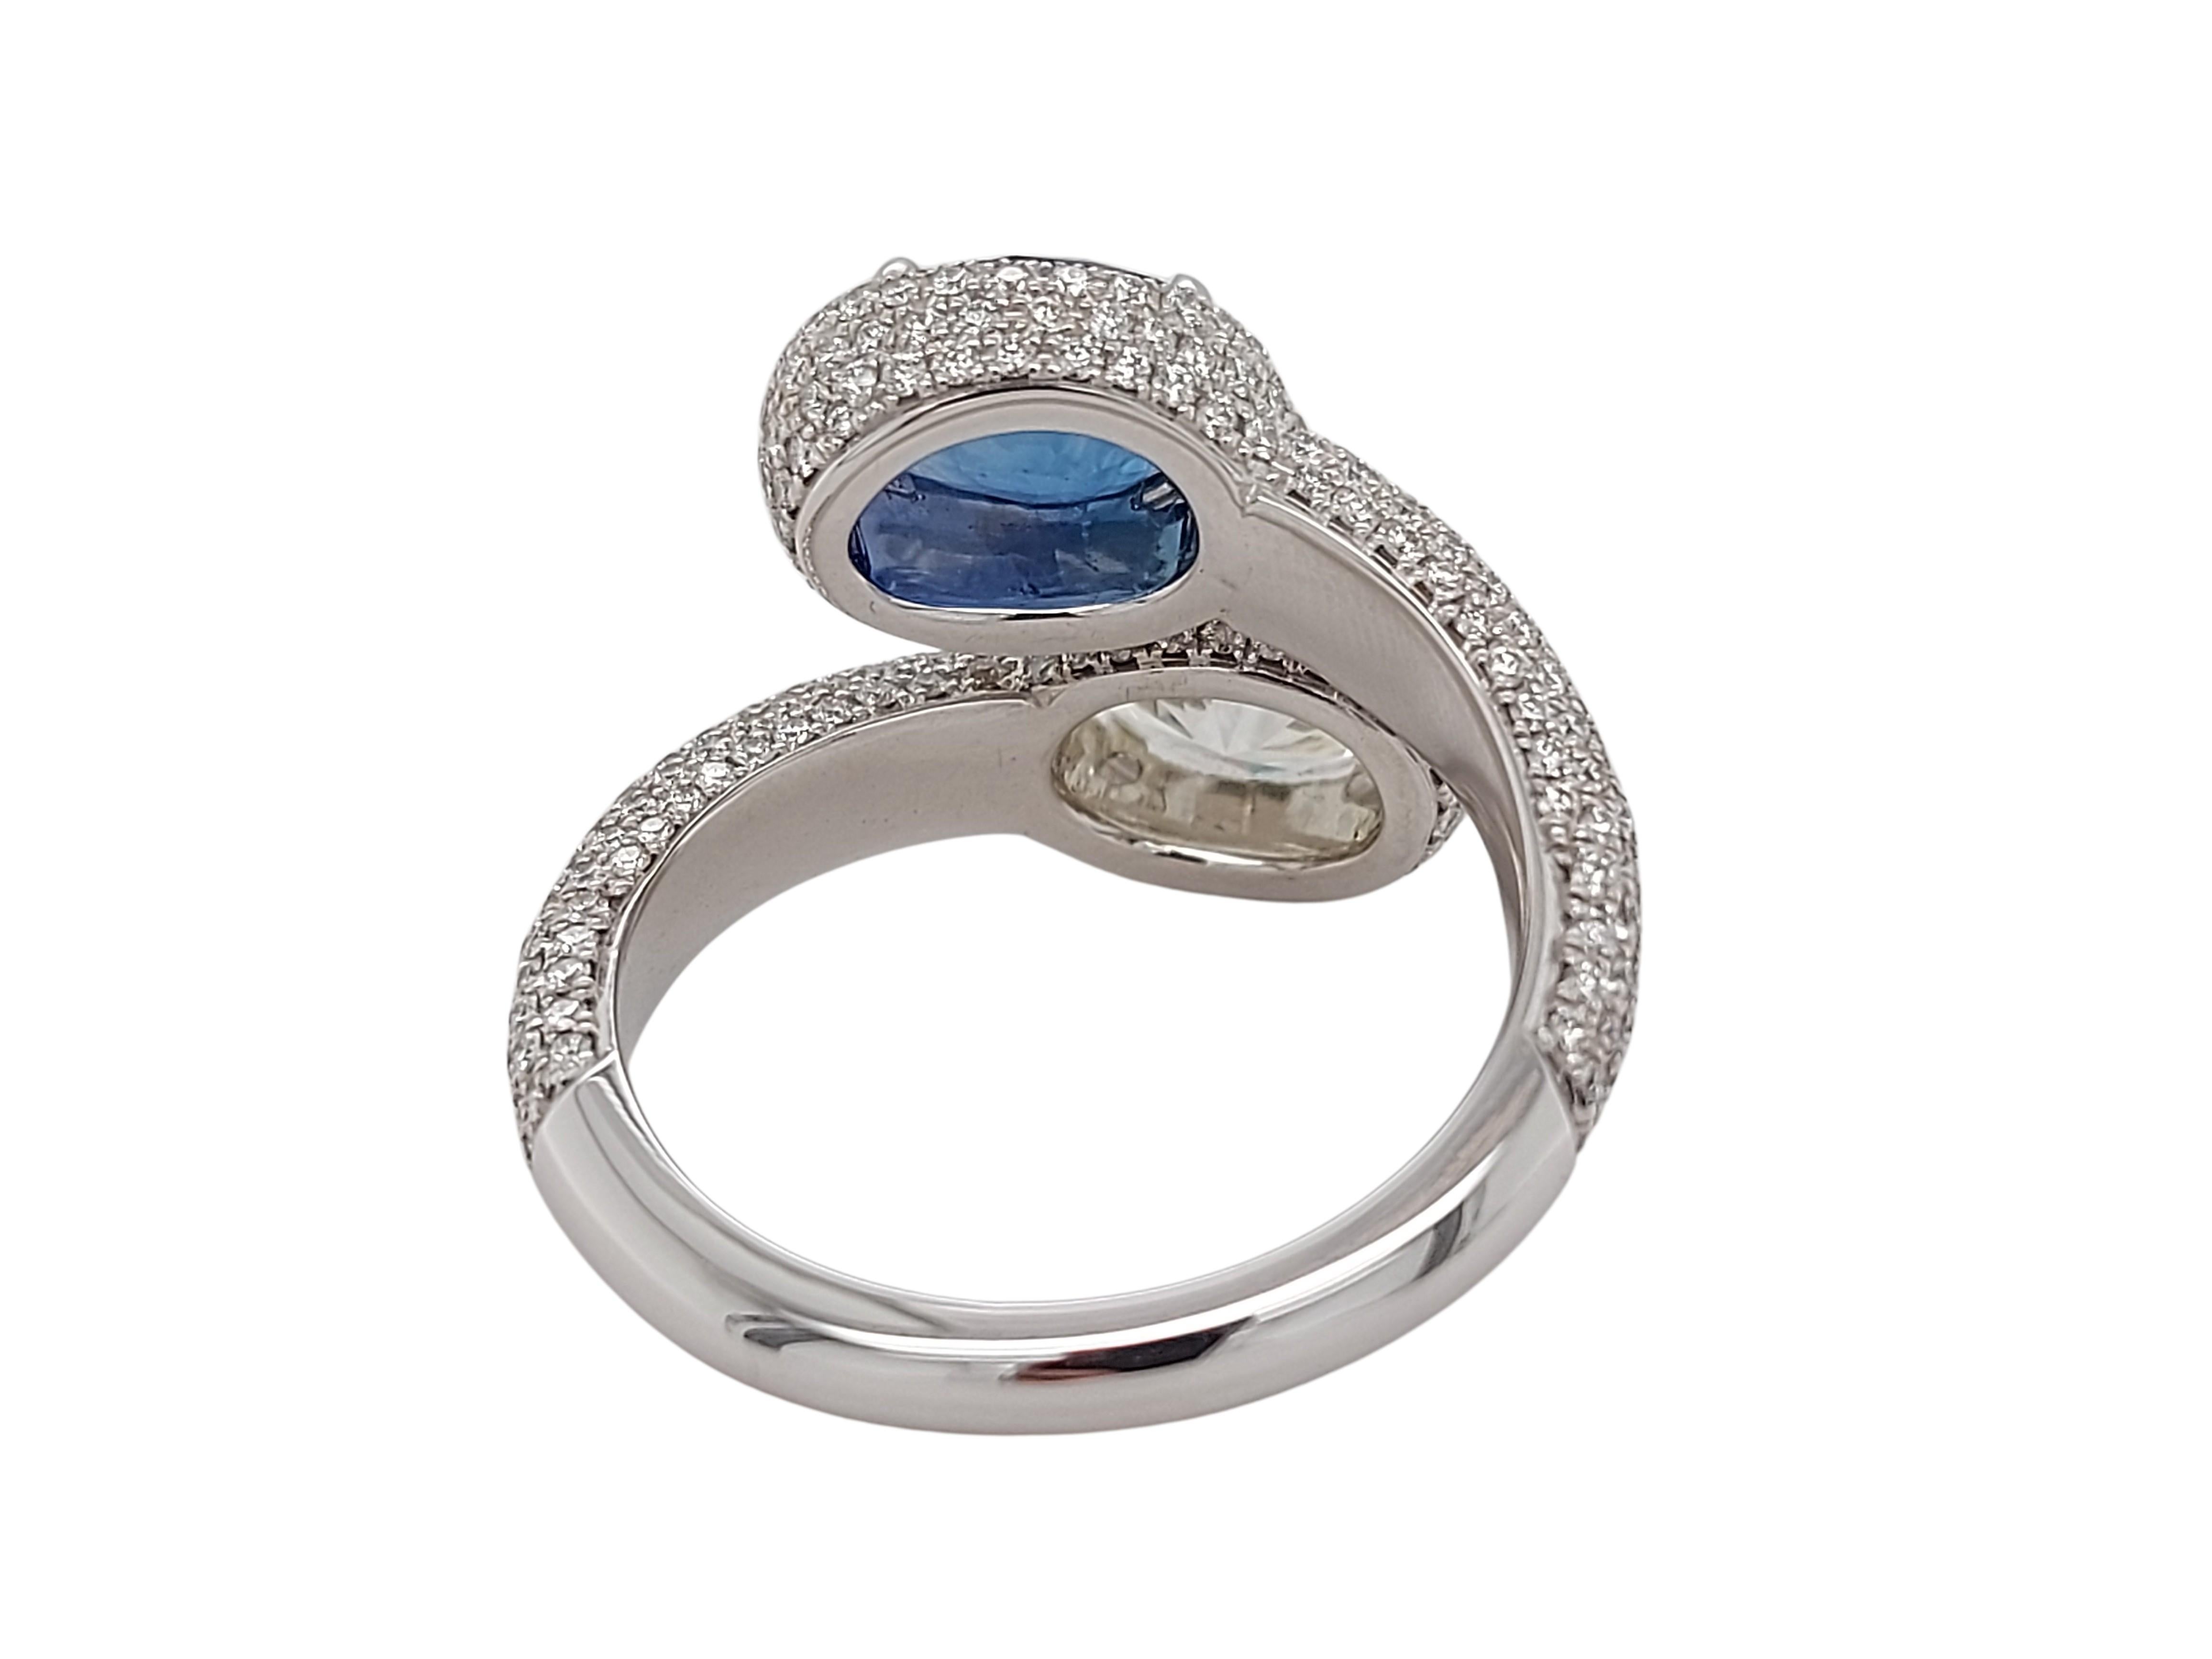 Stunning Toi et Moi 18kt White Gold Ring with a 2.63 Carat Sapphire, 1.67 Carat  For Sale 2